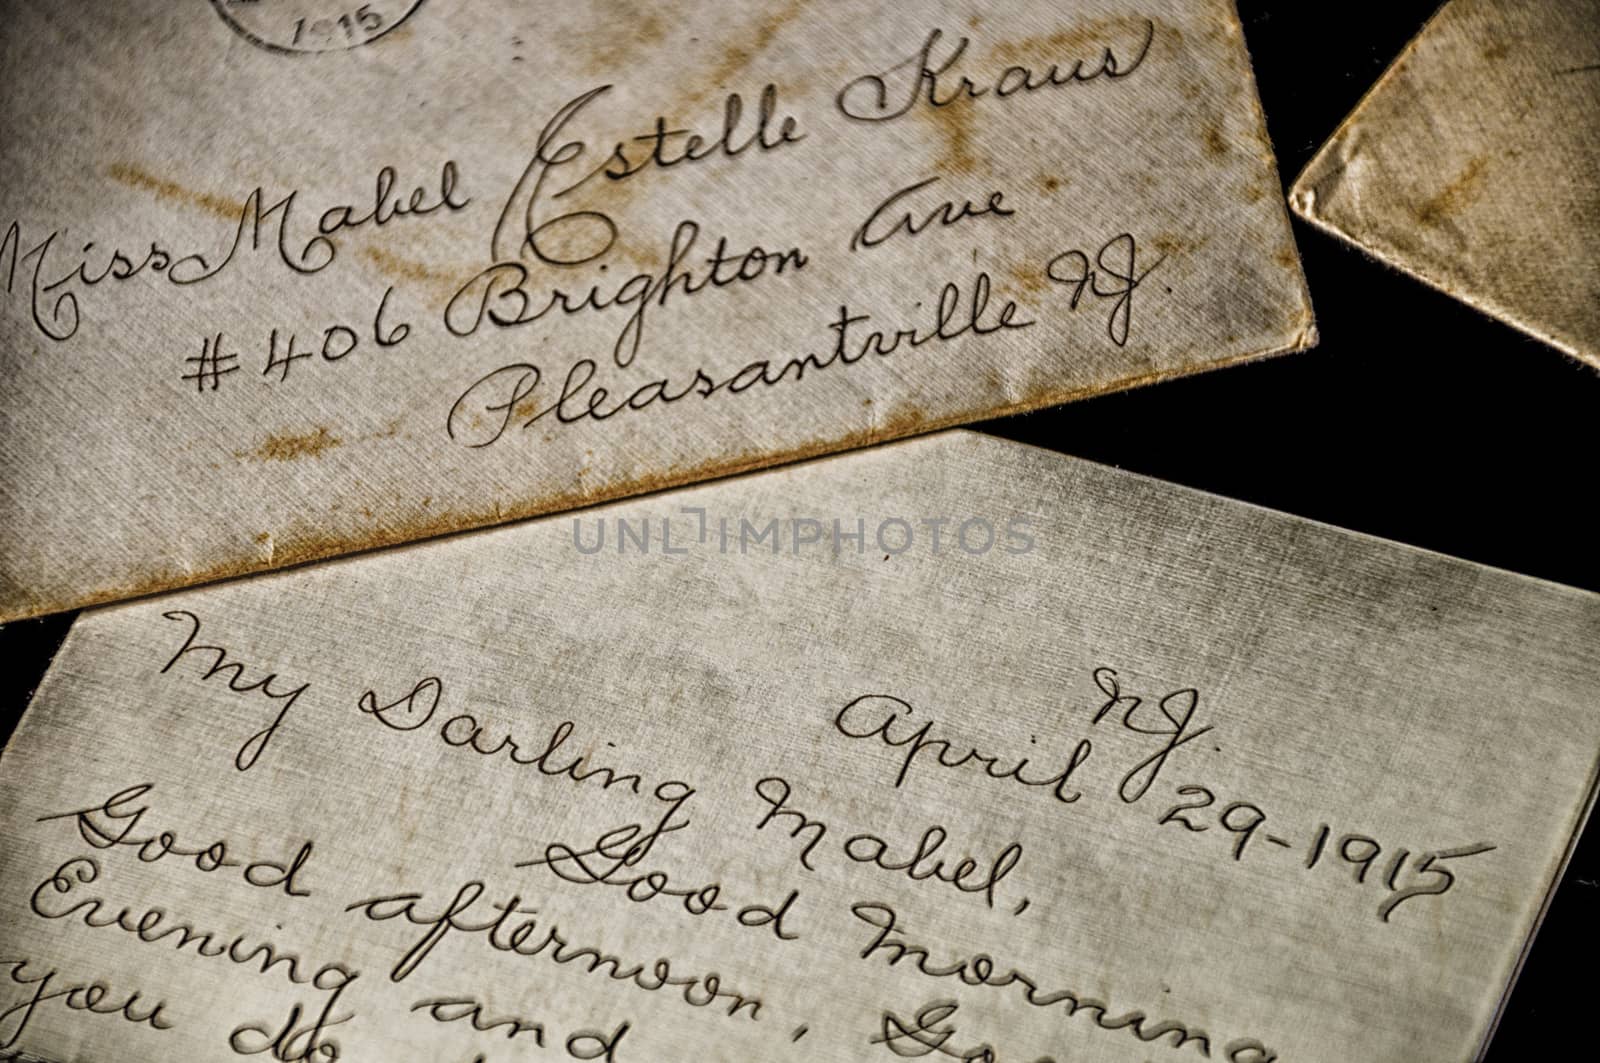 Close up shot of a love letter written more than a hundred years ago in 1915 sent to Pleasantville, NJ